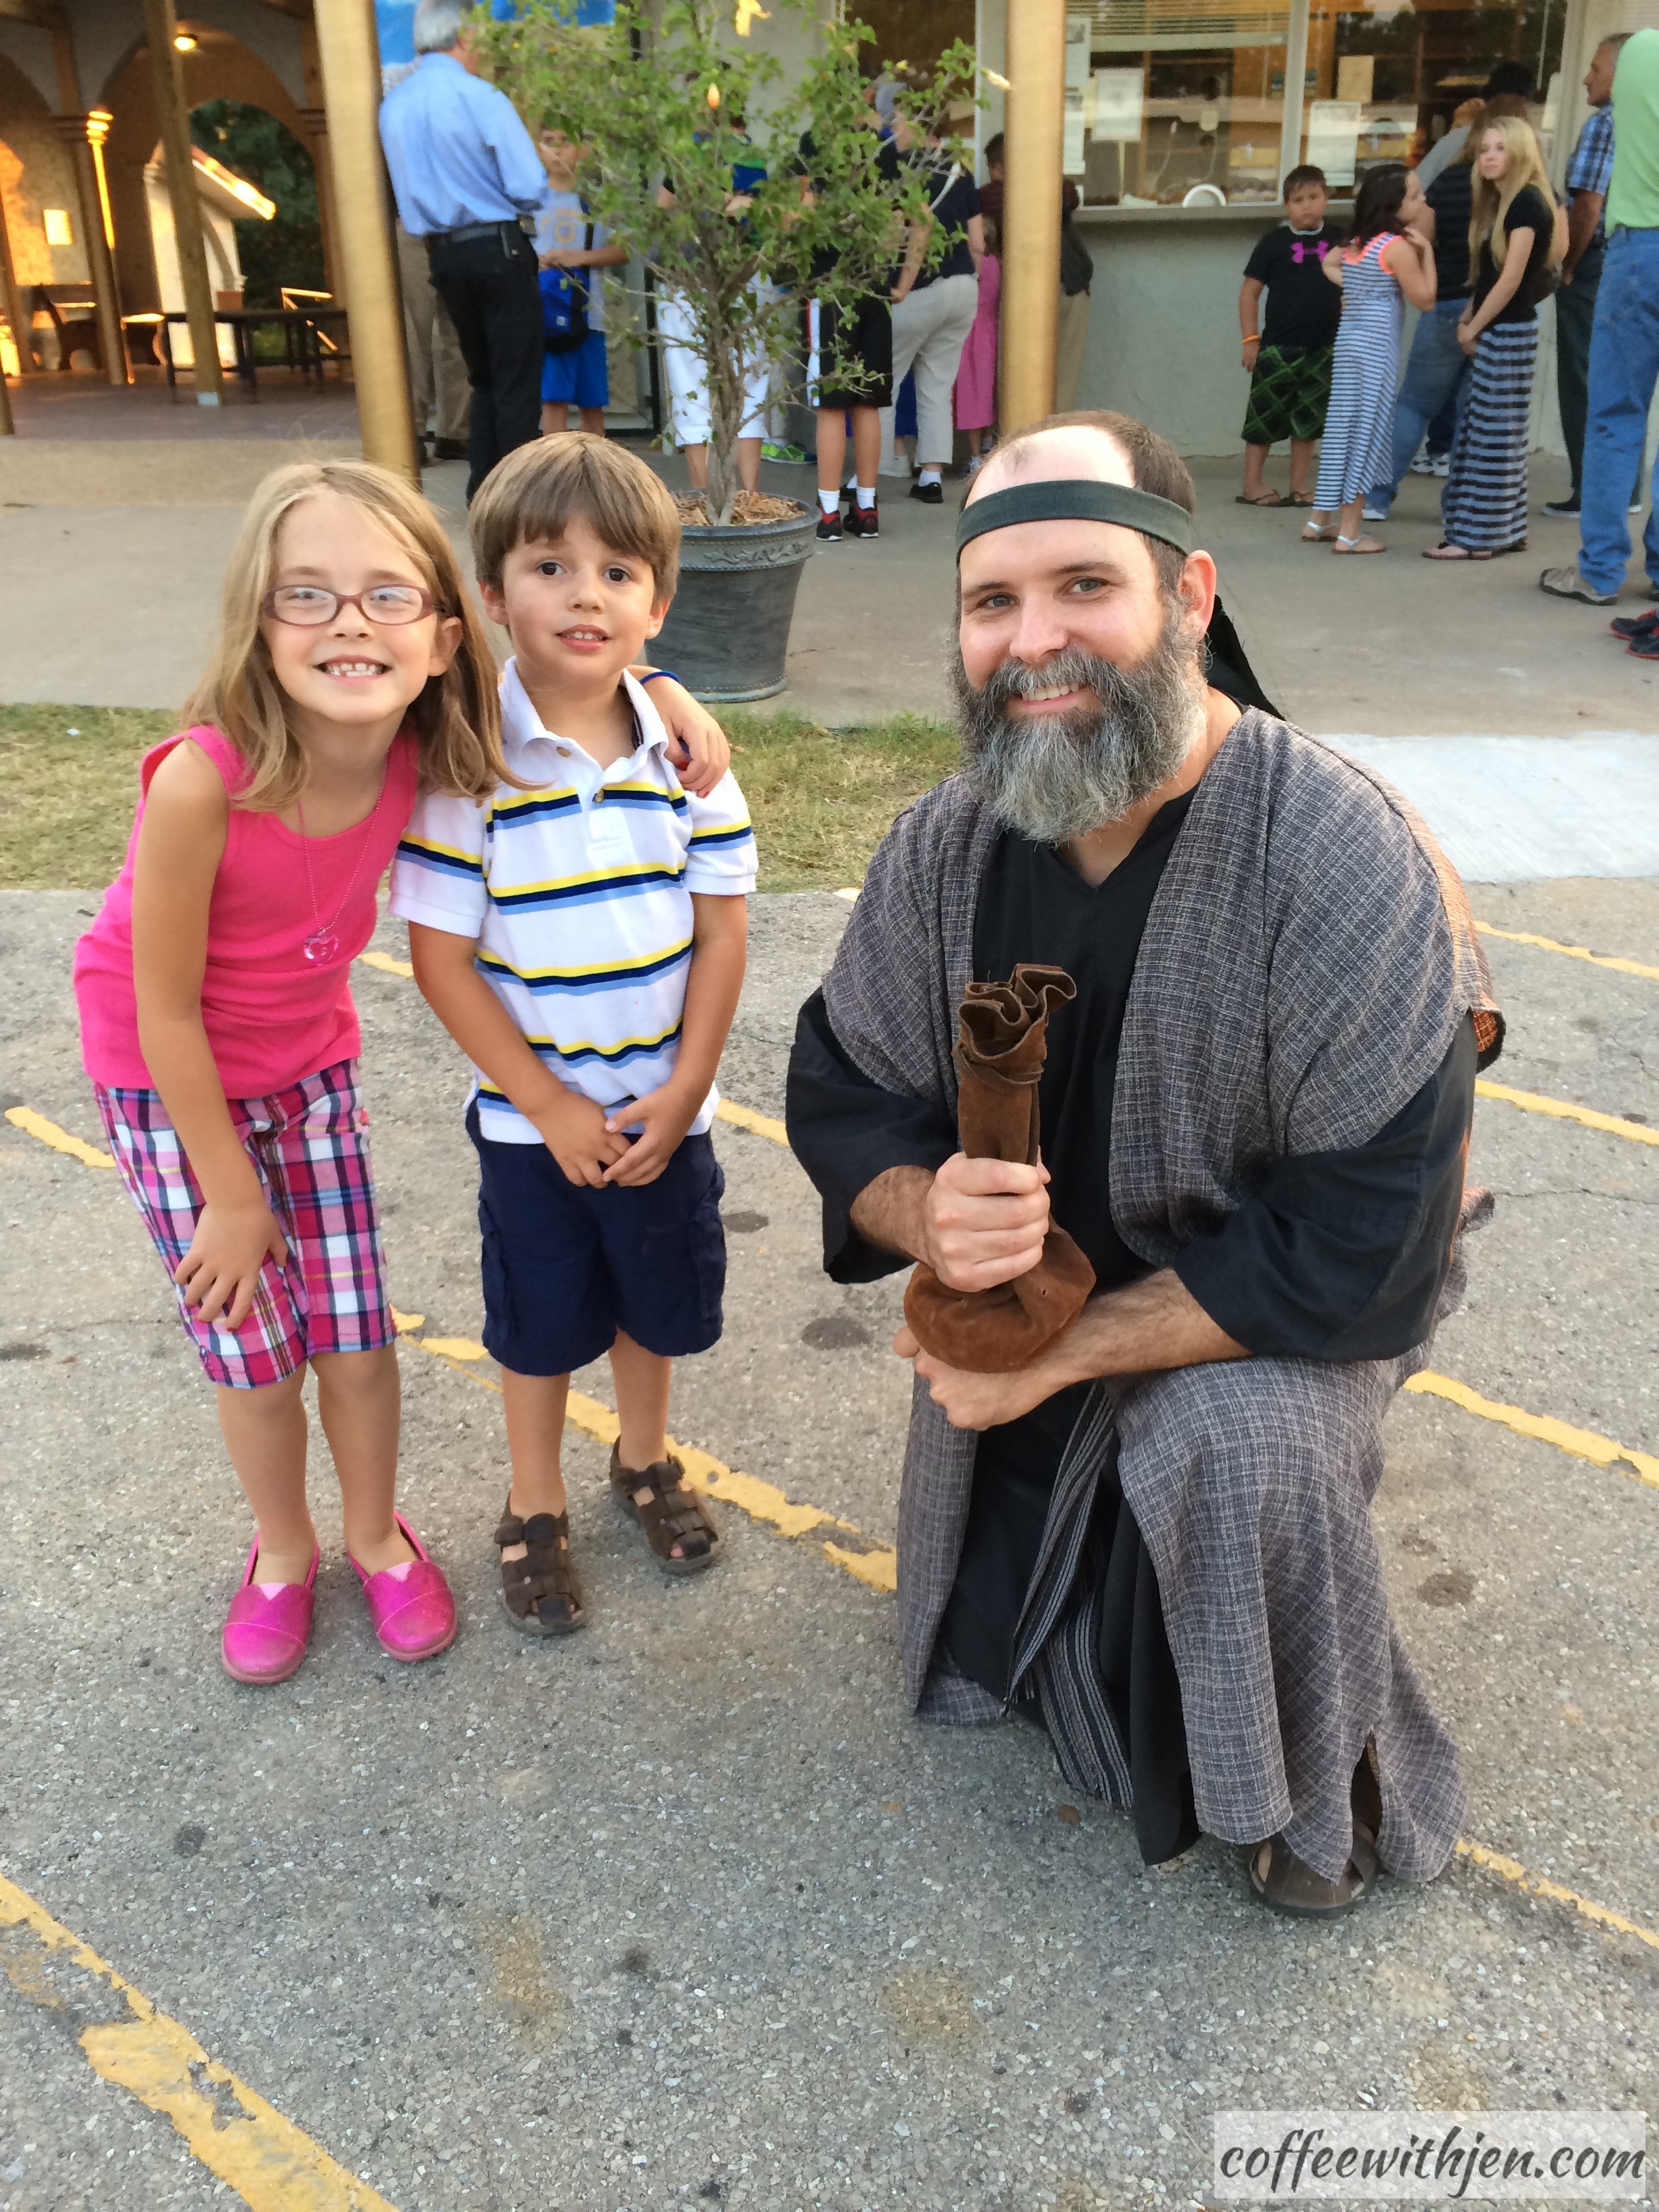 Meeting Judas before the play.  He gave the kids a piece of silver.